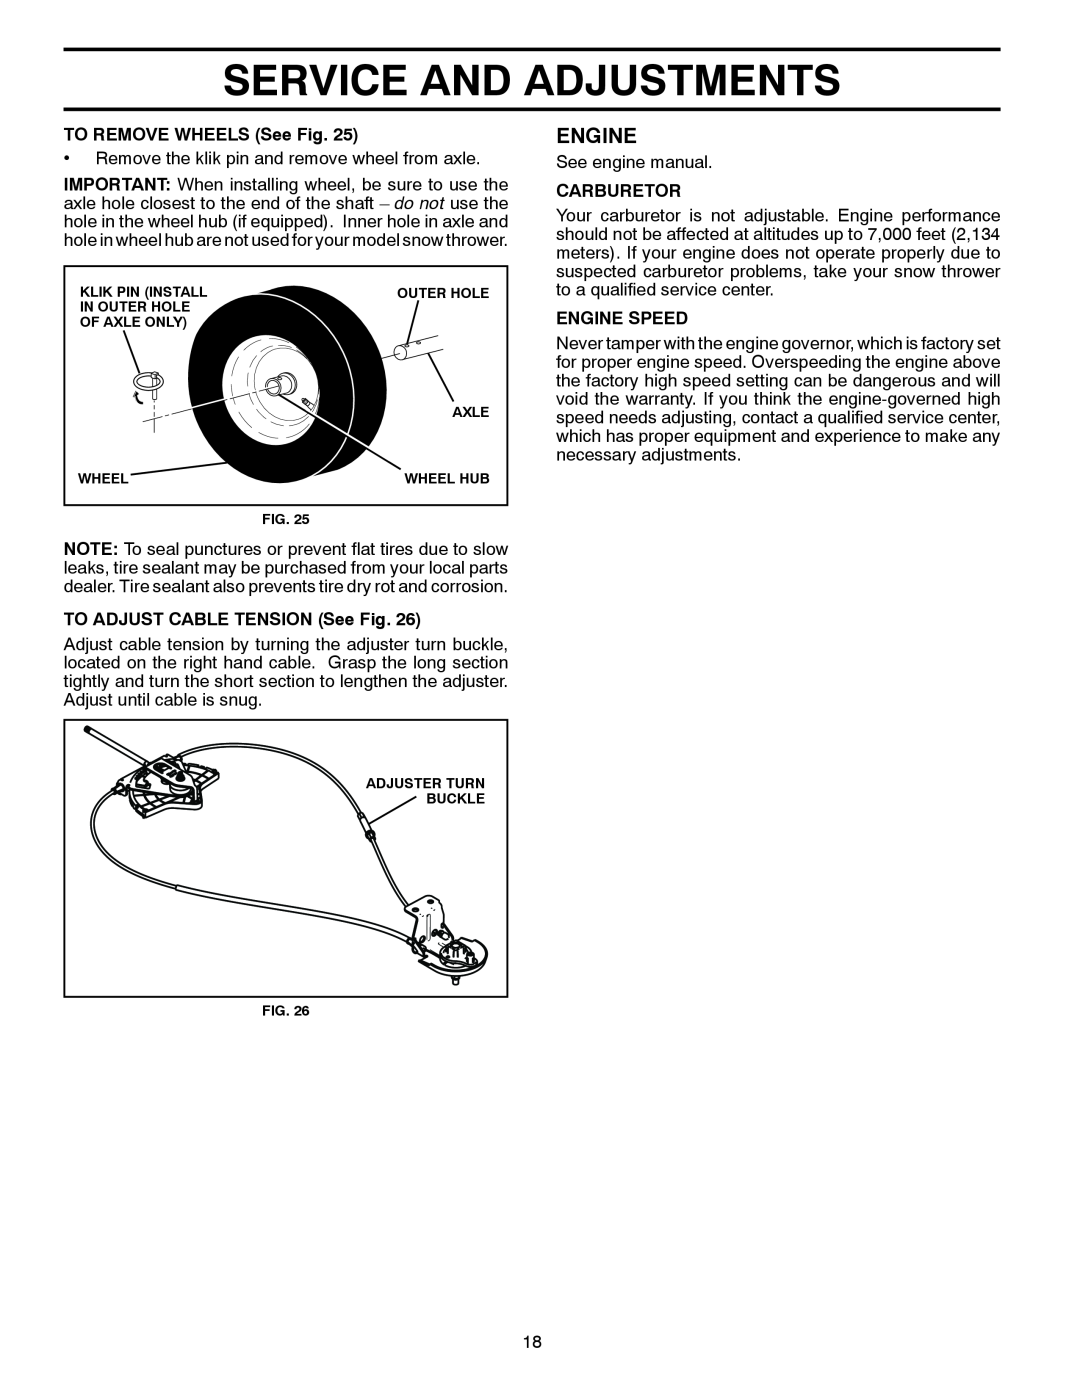 Husqvarna 16530-LS Service And Adjustments, Engine, TO REMOVE WHEELS See Fig, TO ADJUST CABLE TENSION See Fig, Carburetor 